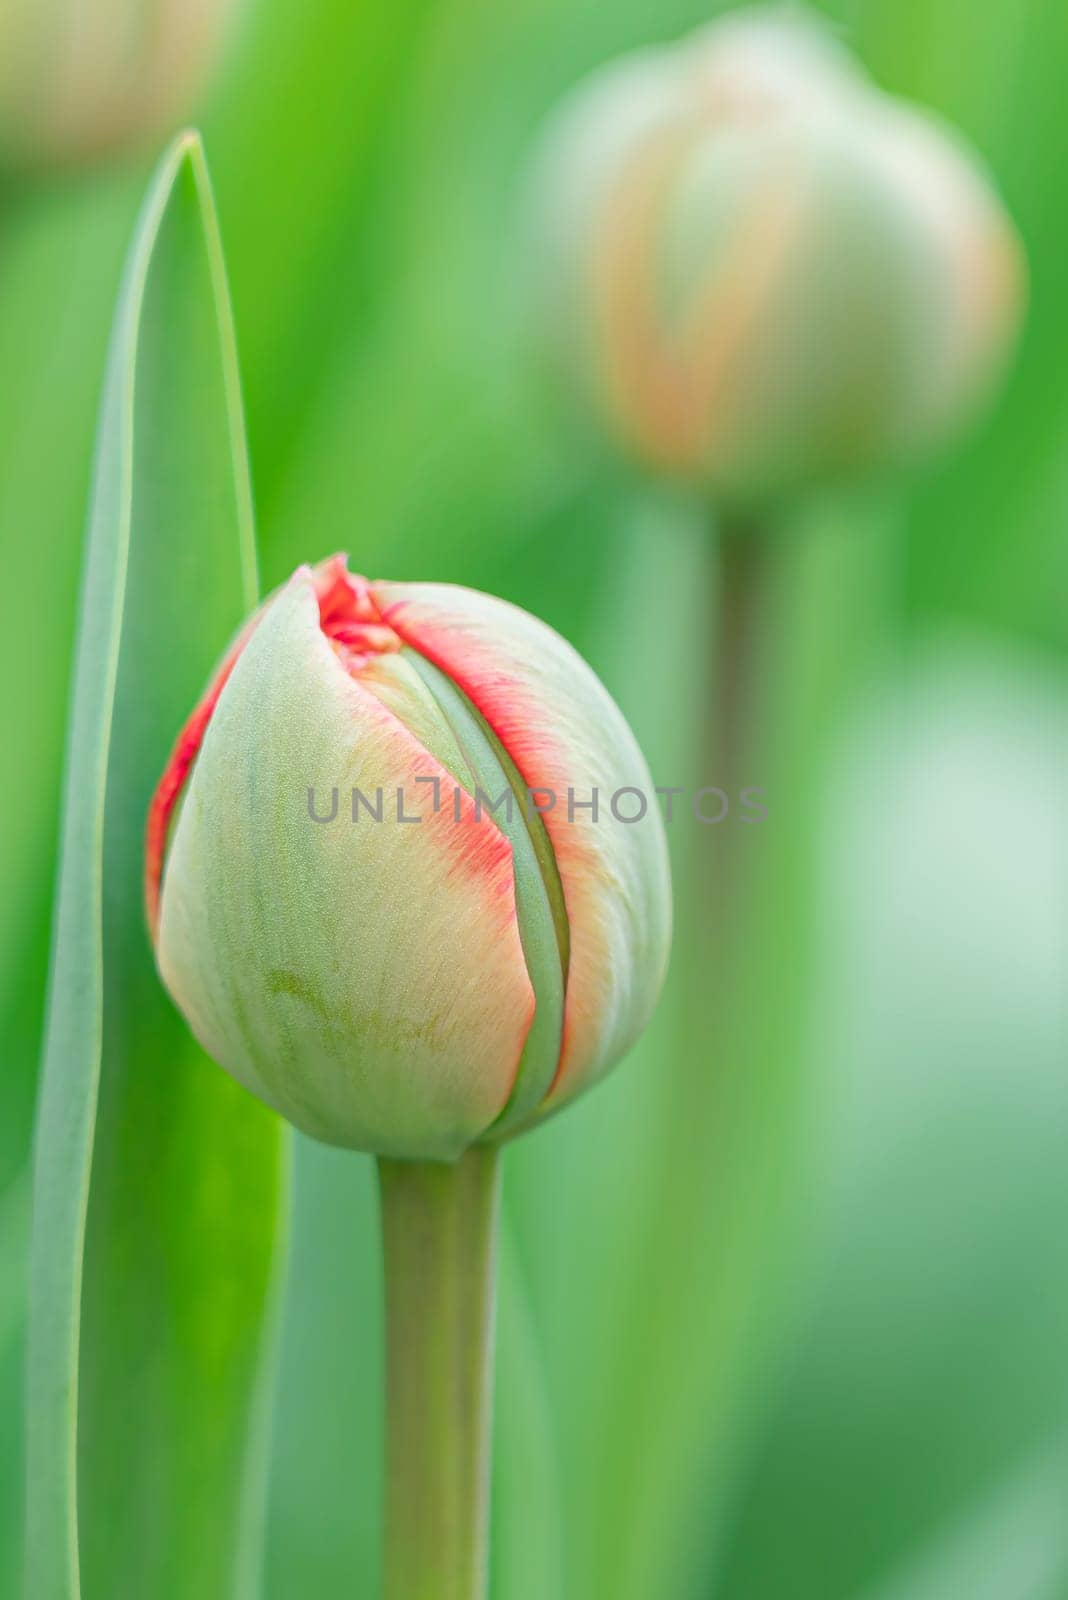 the unopened buds of orange tulips in the garden by roman112007